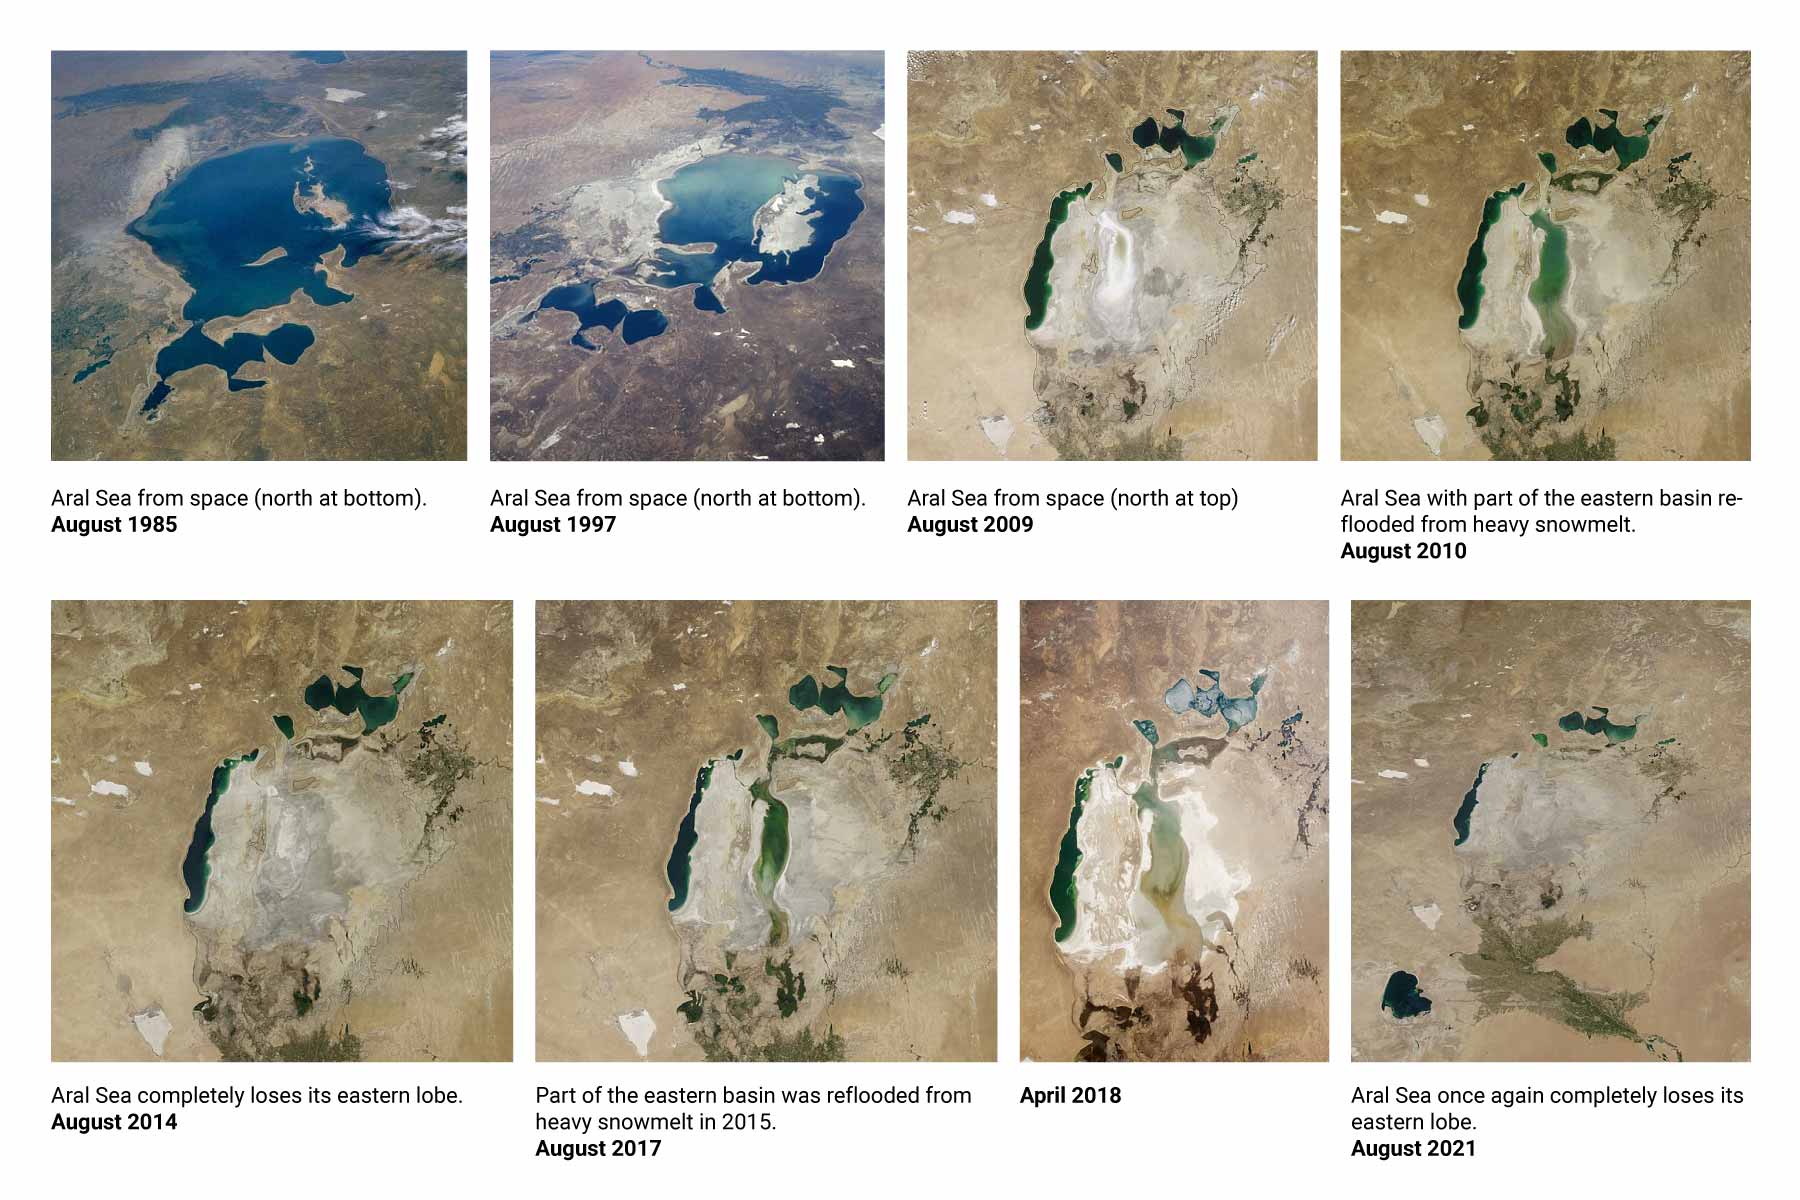 Satellite images show the changing water levels in the Aral Sea from 1985 to 2021.